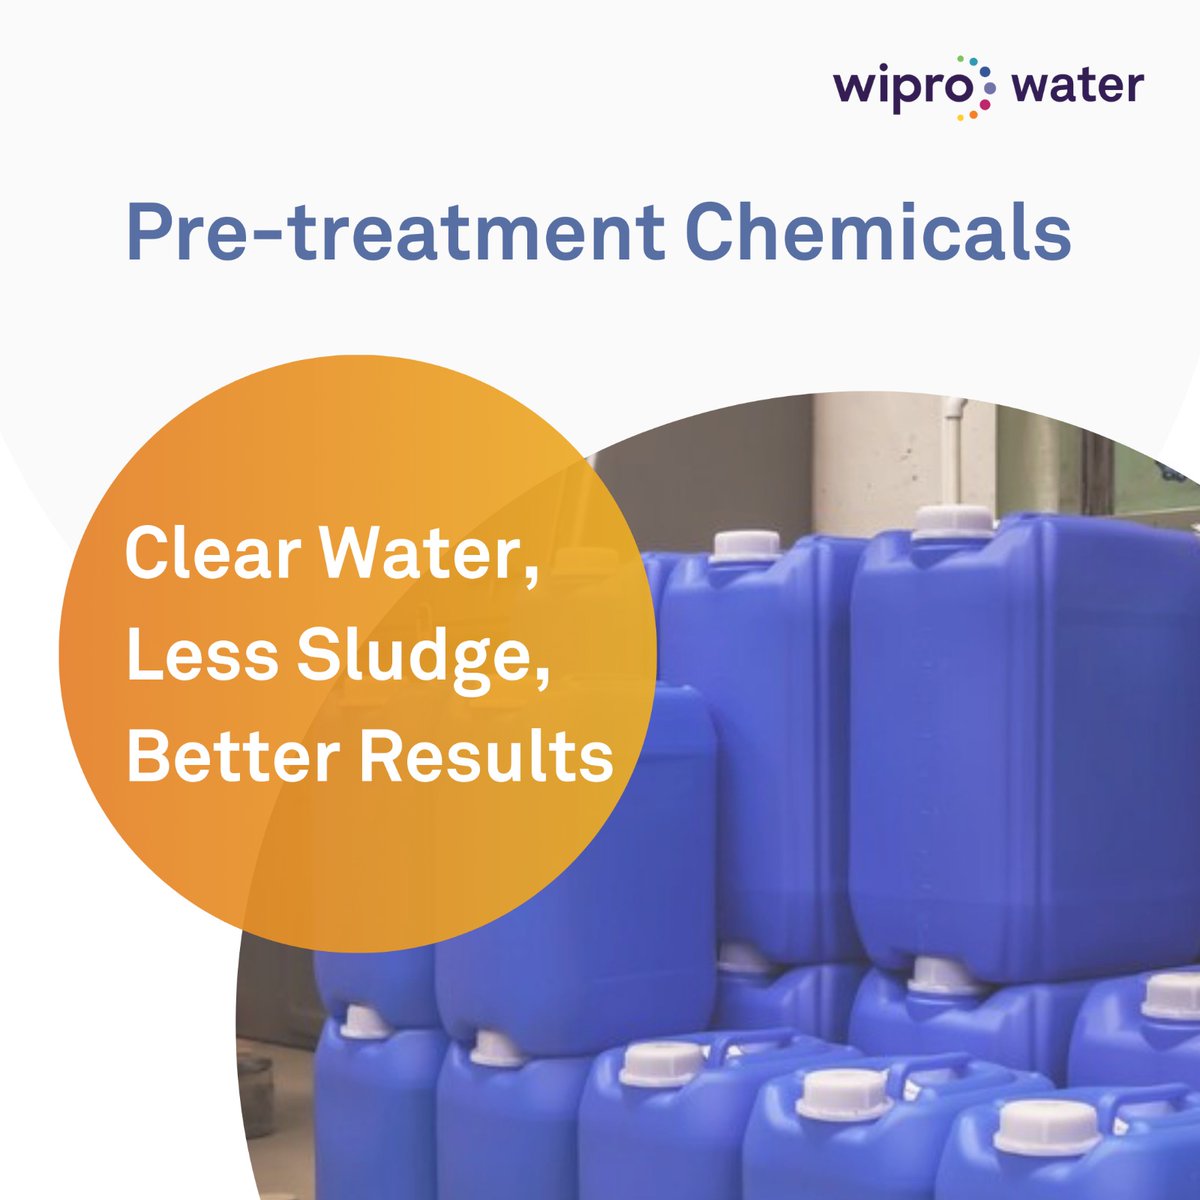 Wipro Water offers a range of pre-treatment #chemicals that deliver clear water and less sludge, which means better results for your wastewater treatment system.

#wiprowater #industrialwatertreatment #specialitychemicals #pretreatment #clearwater #wastewatermanagement